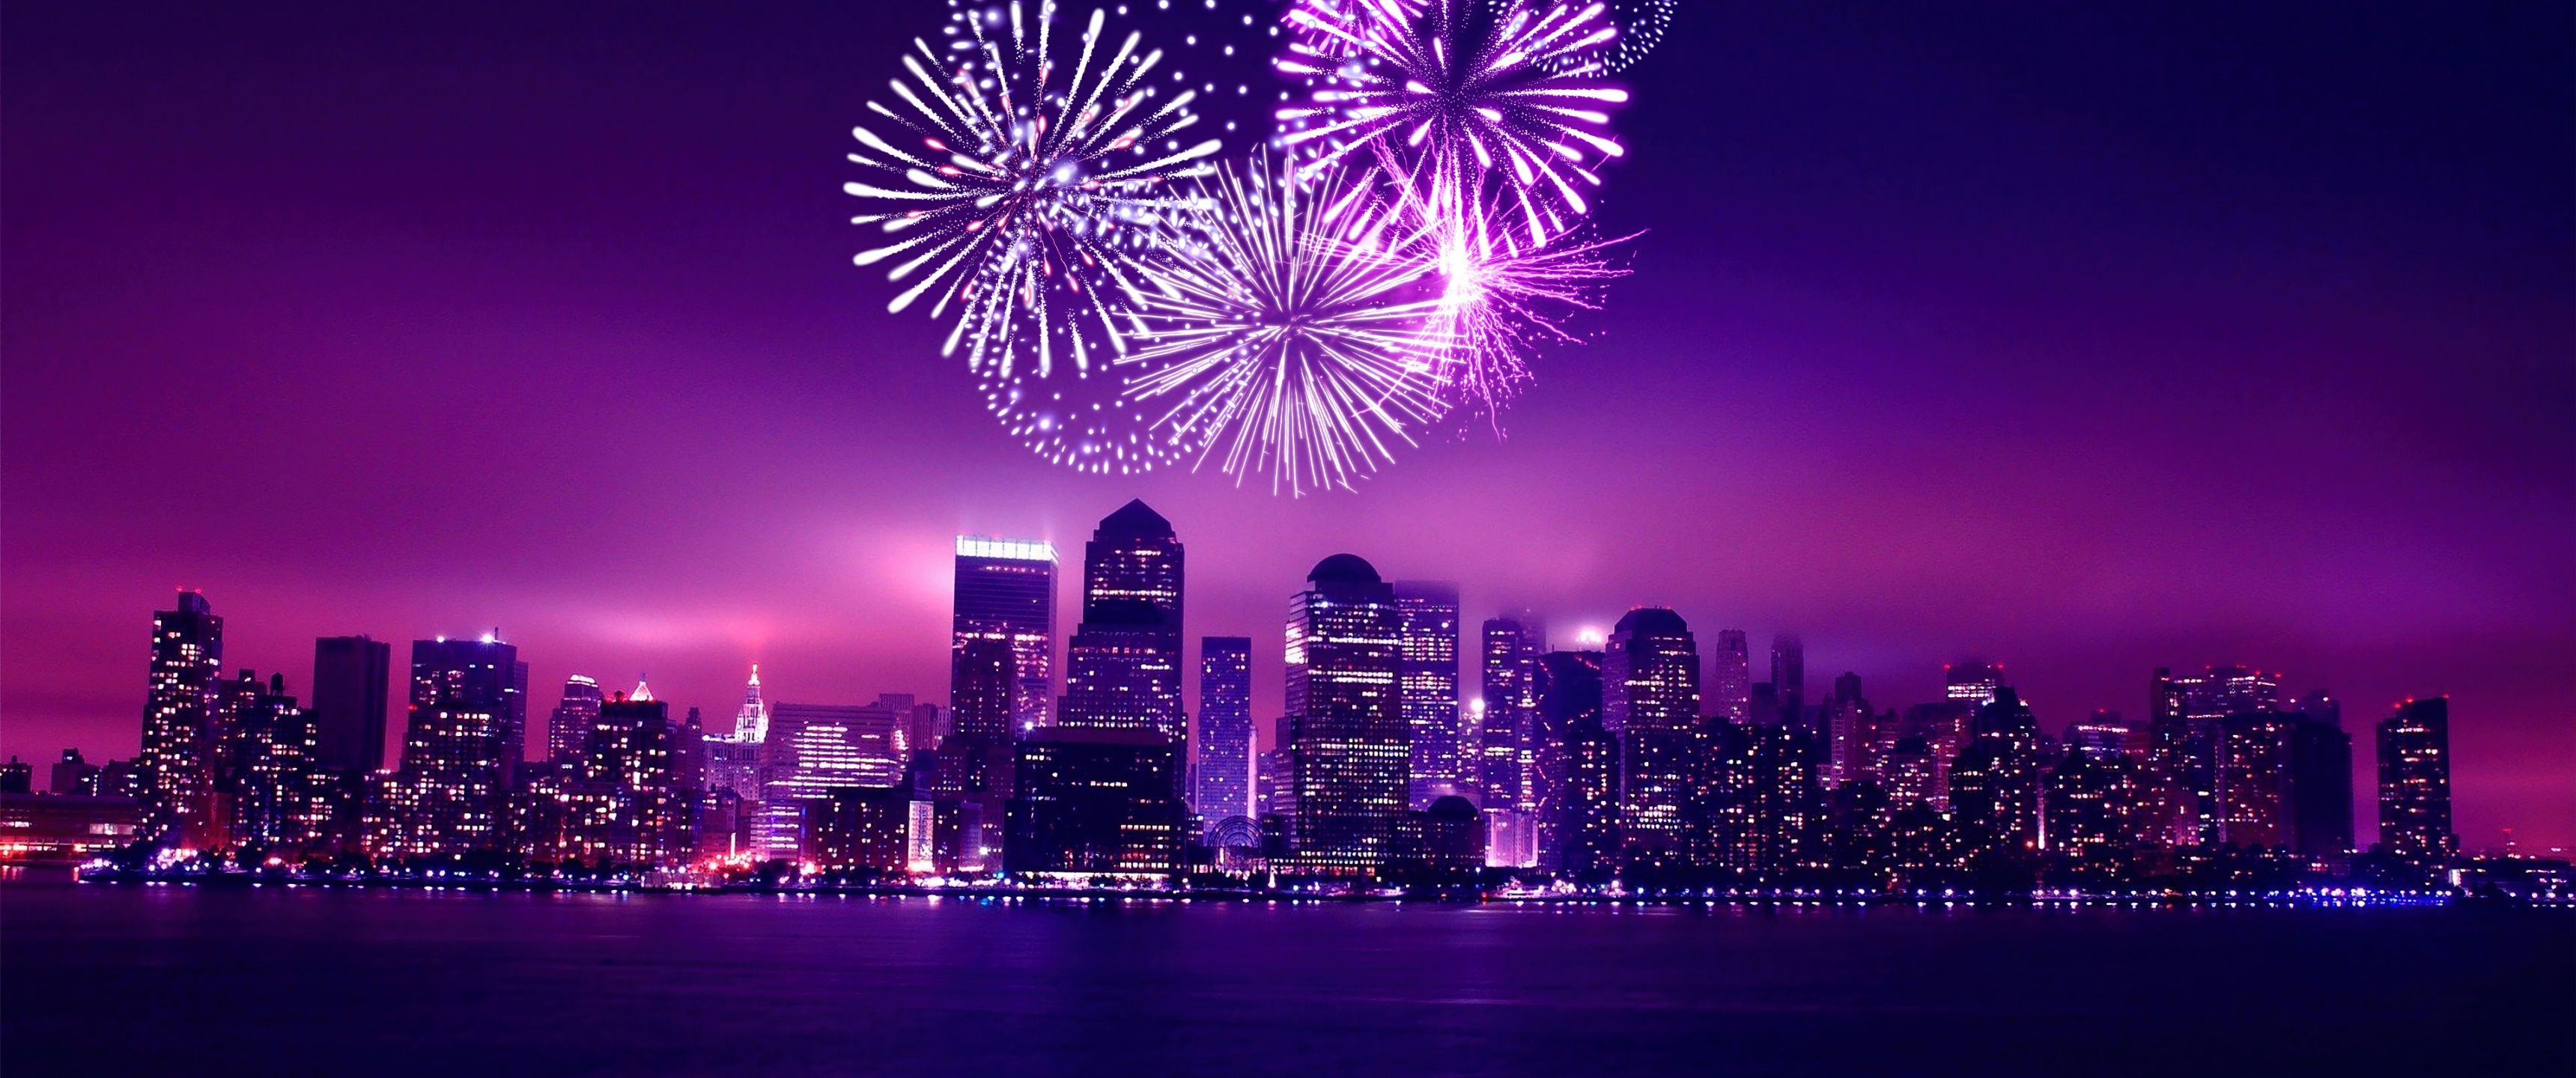 A purple city skyline with fireworks in the background - 3440x1440, Chicago